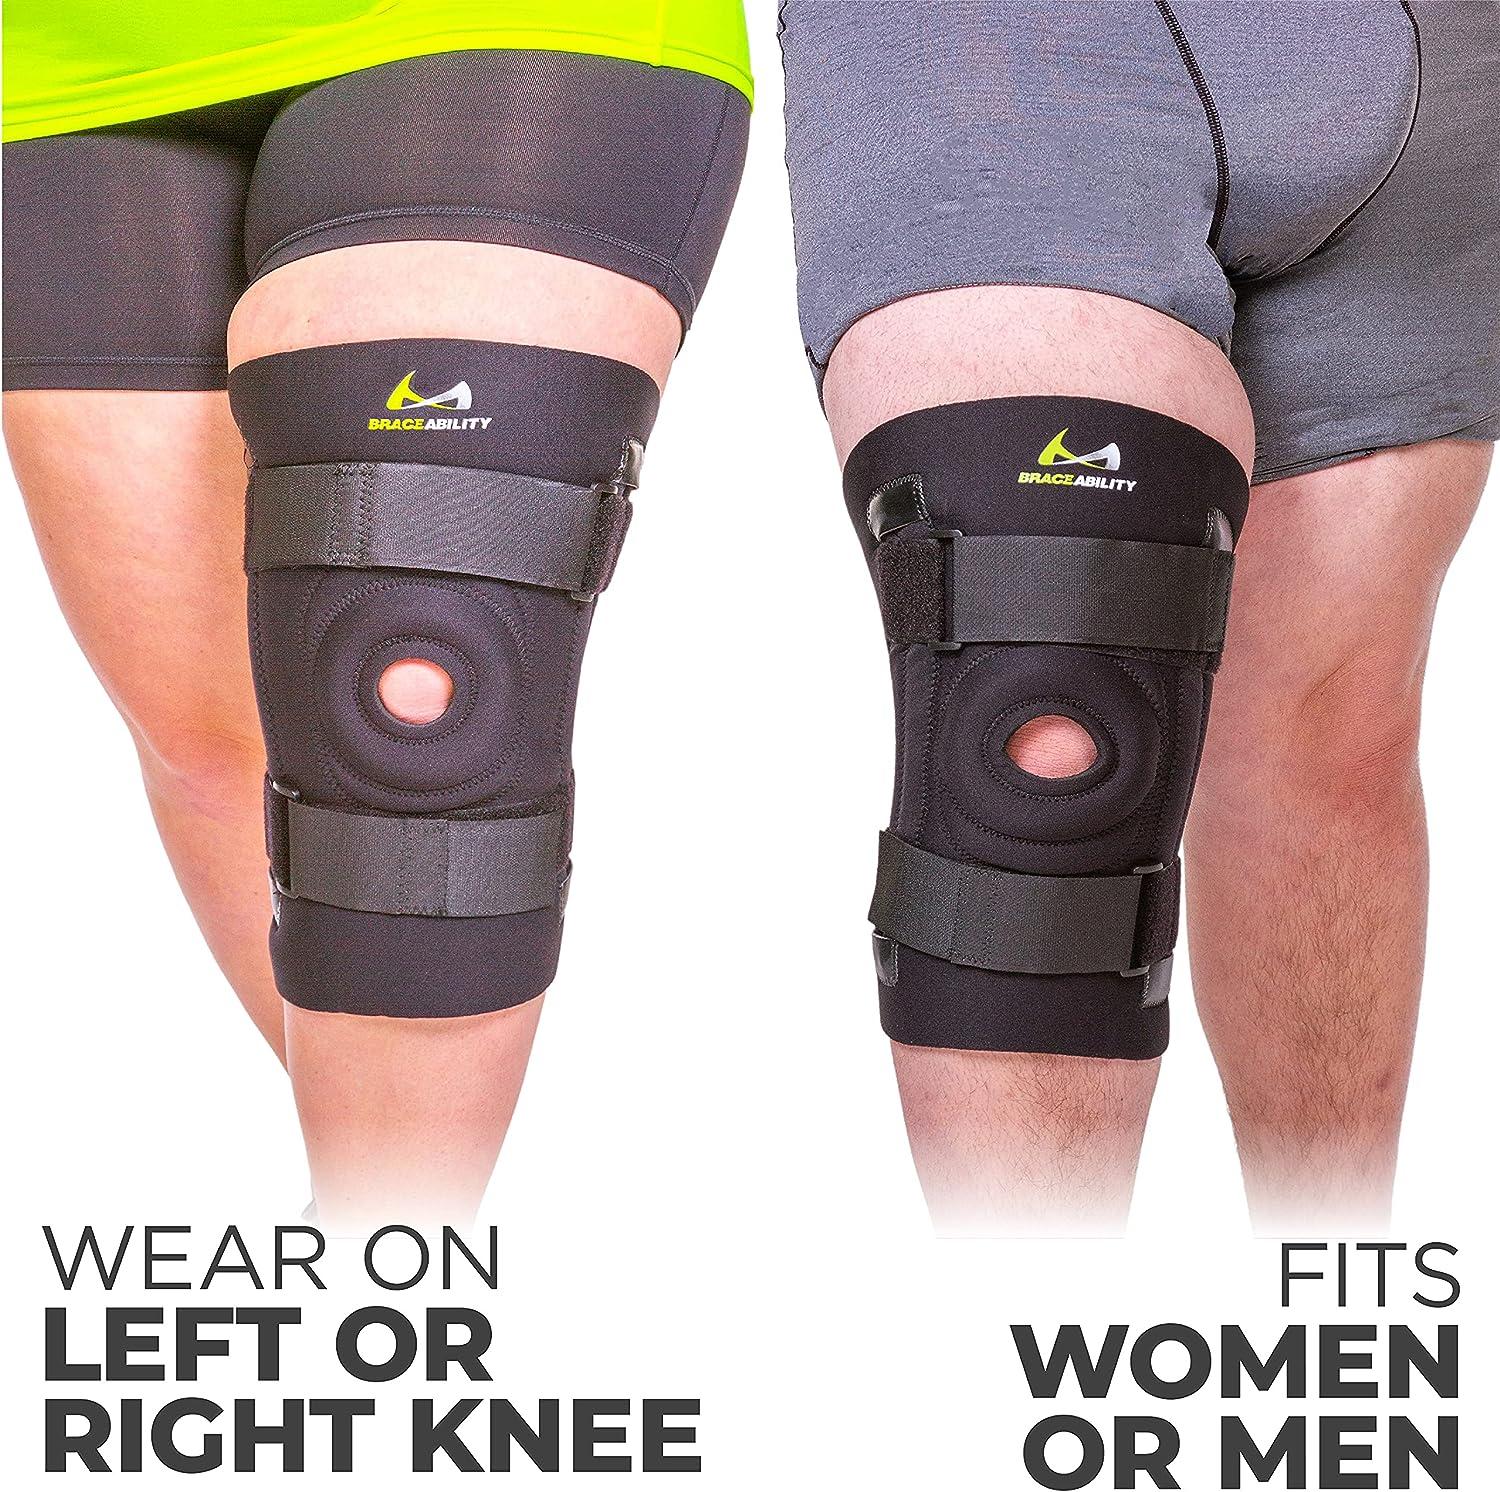 BraceAbility Knee Brace for Large Legs and Bigger People with Wide Thighs -  Kneecap Protection Pad Treats Patellar Tendonitis Chondromalacia  Patellofemoral Pain Instability and Dislocation (3XL)